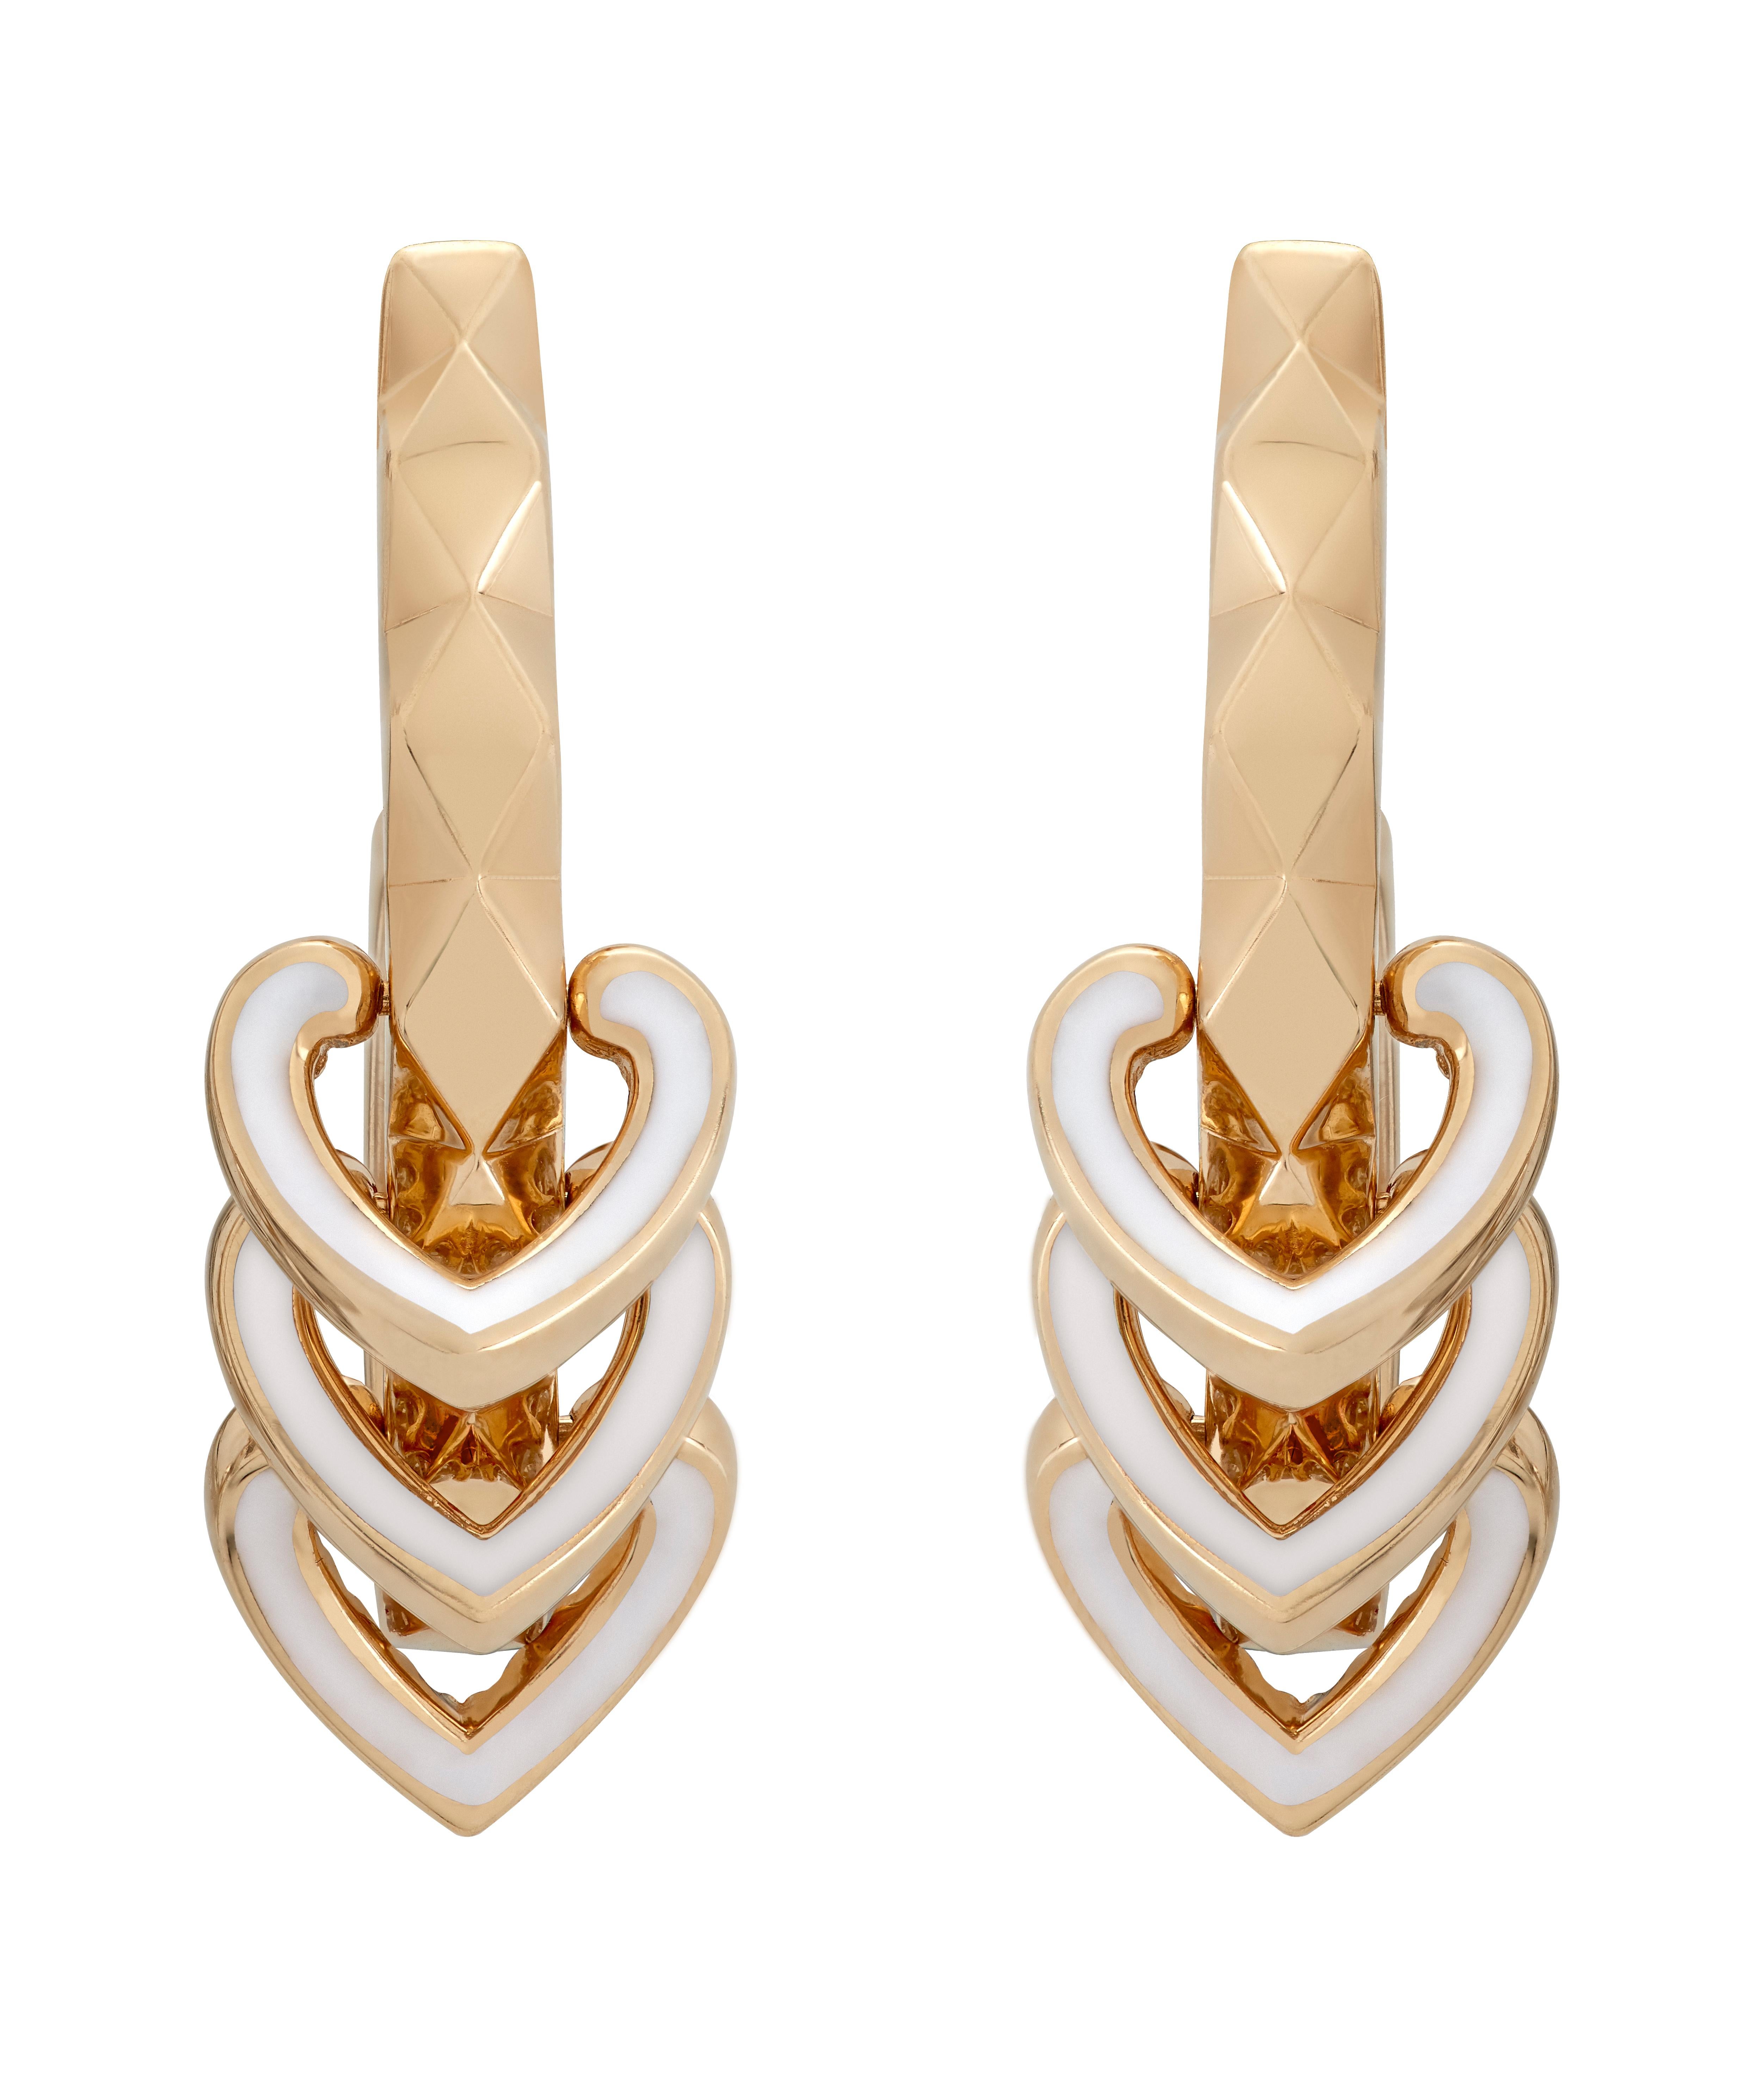 A House of Garrard pair of 18 karat yellow gold earrings from the 'Aloria' collection, patterned with faceted gold and each centred with 3 reversable round white diamond and white enamel motifs. 

78 round white diamonds weighing: 0.79cts

The House